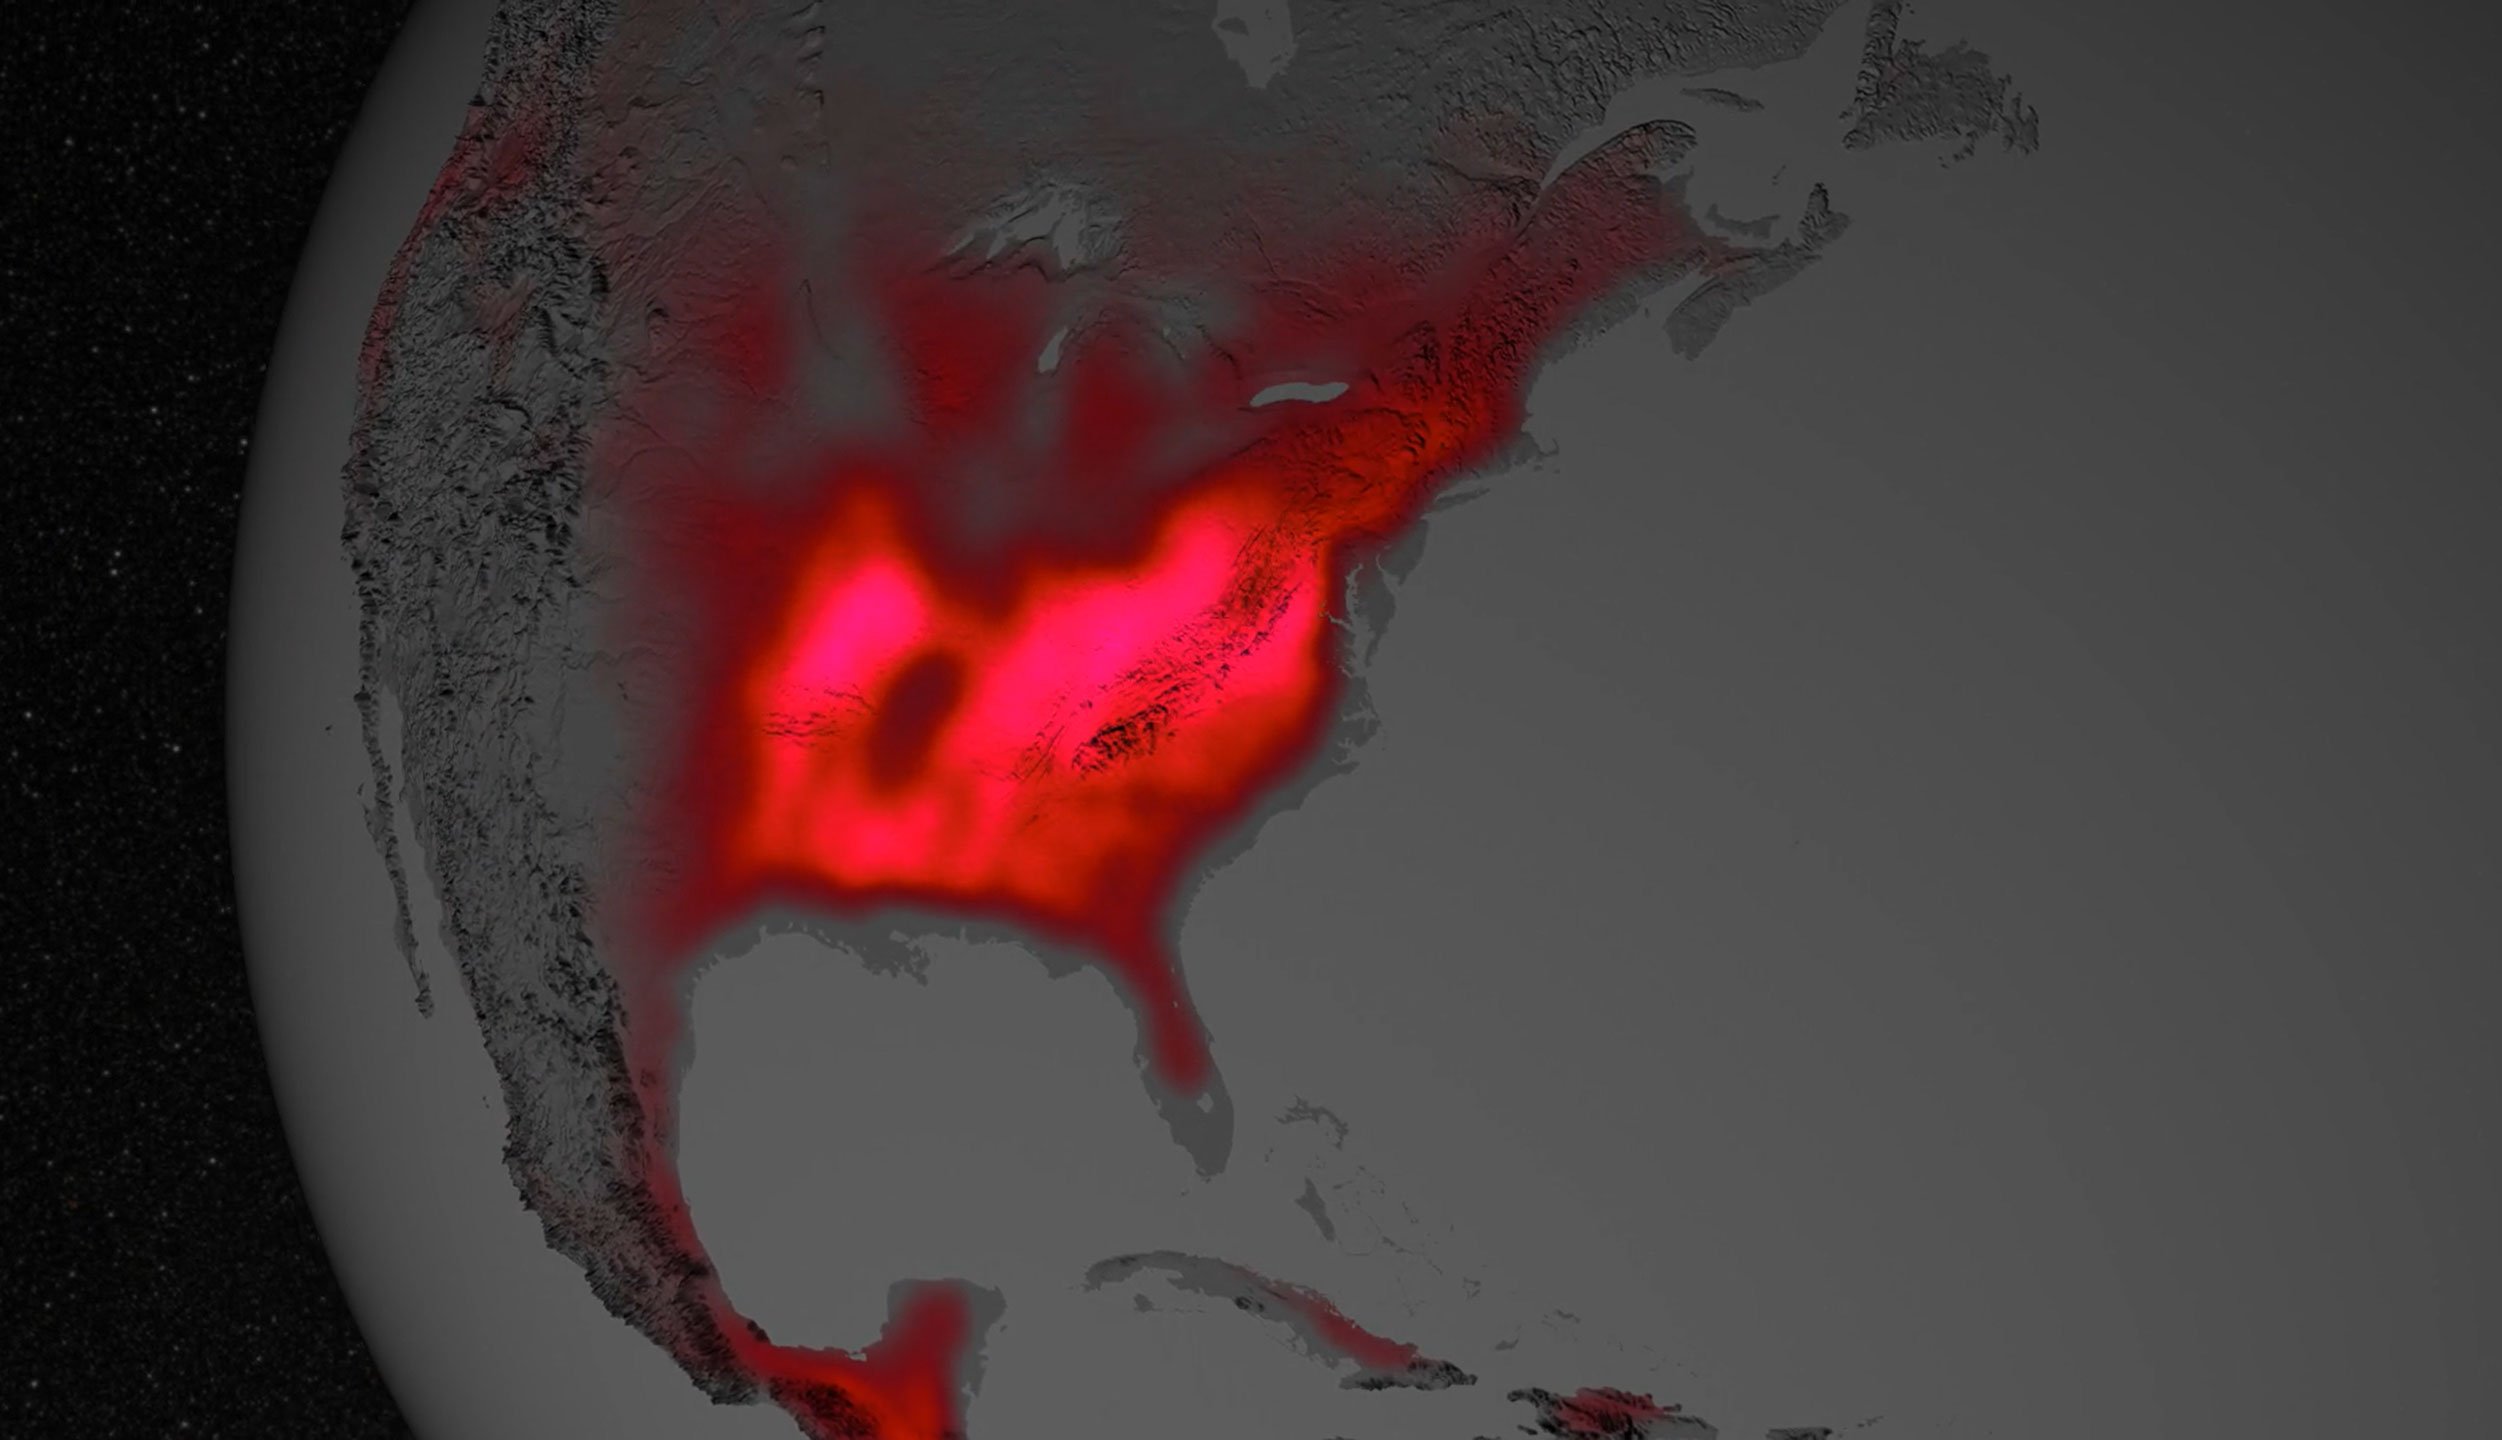 Growing plants emit a form of light detectable by NASA satellites orbiting hundreds of miles above Earth. Parts of North America appear to glimmer in this visualization, depicting an average year. Gray indicates regions with little or no fluorescence; red, pink, and white indicate high fluorescence.